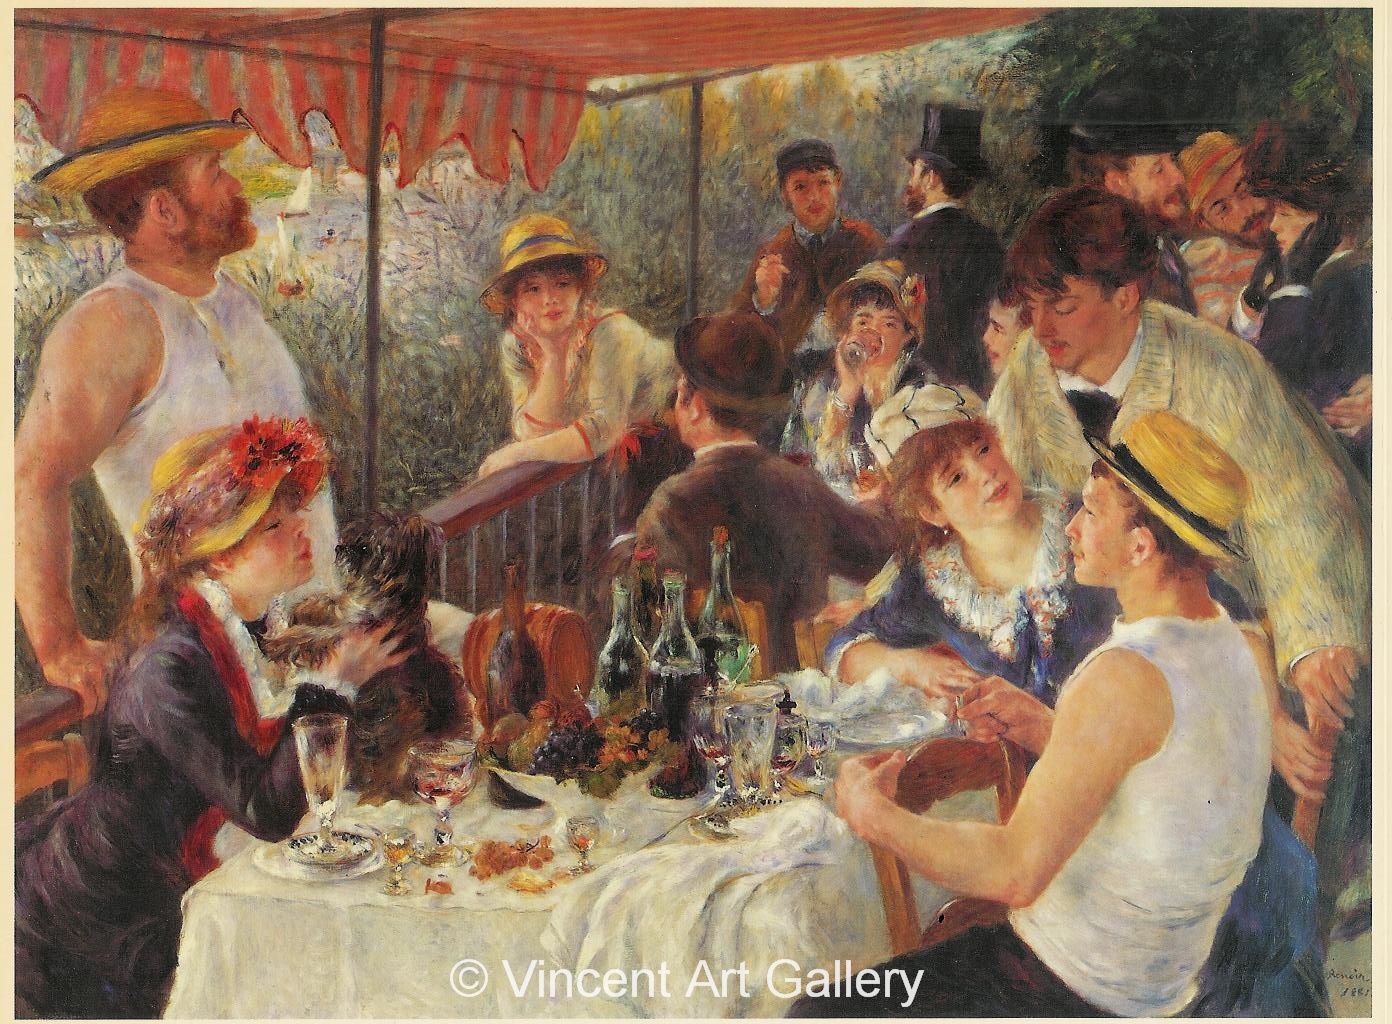 A199, RENOIR, The Canoeists' Luncheon